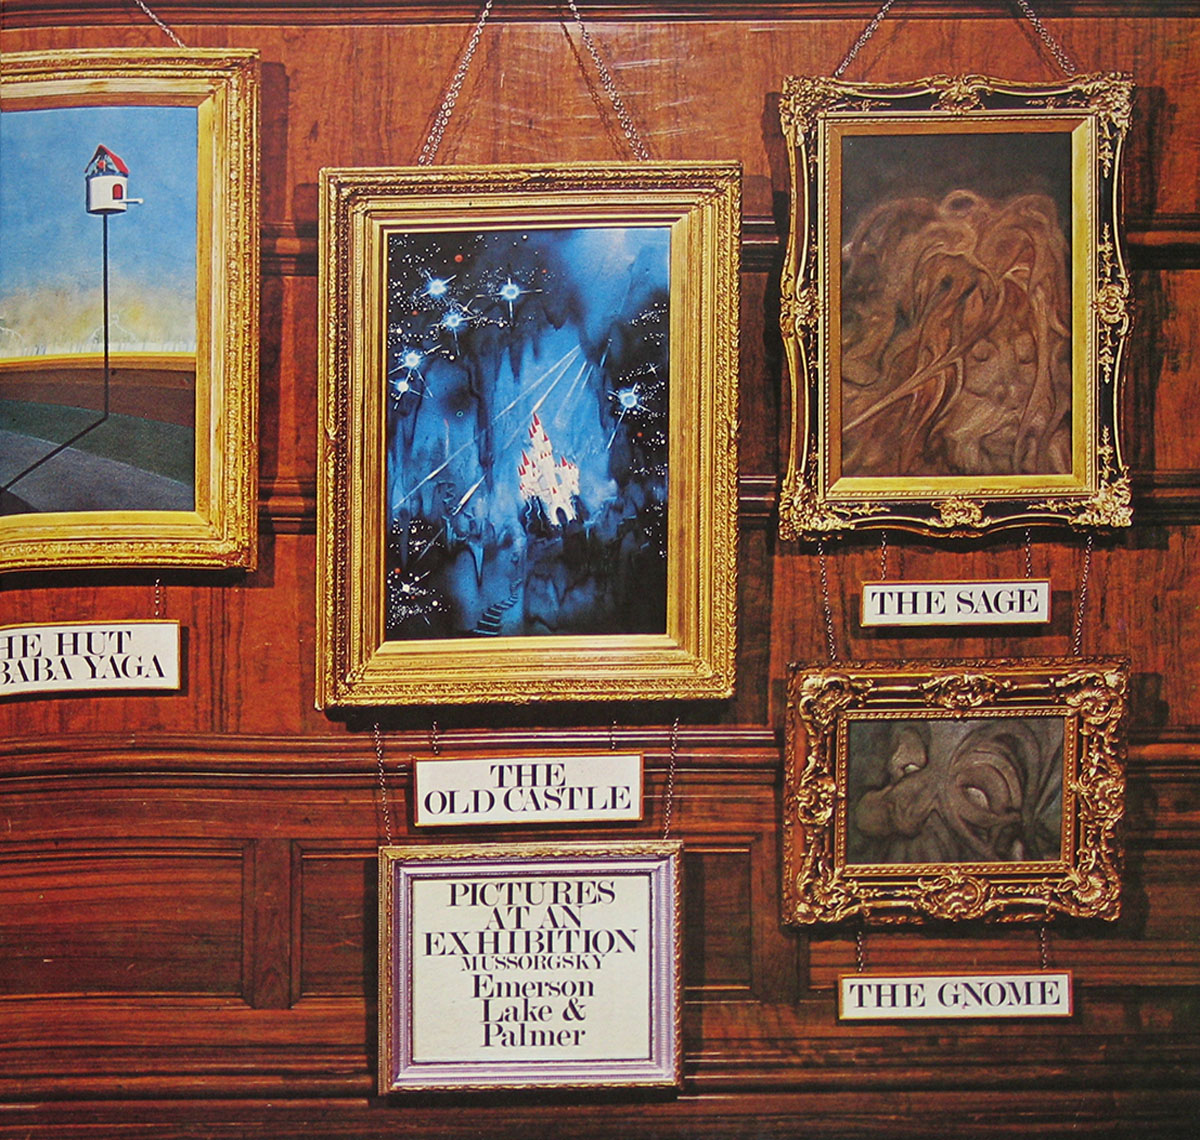 High Resolution Photo elp emerson lake palmer pictures exhibition eec 